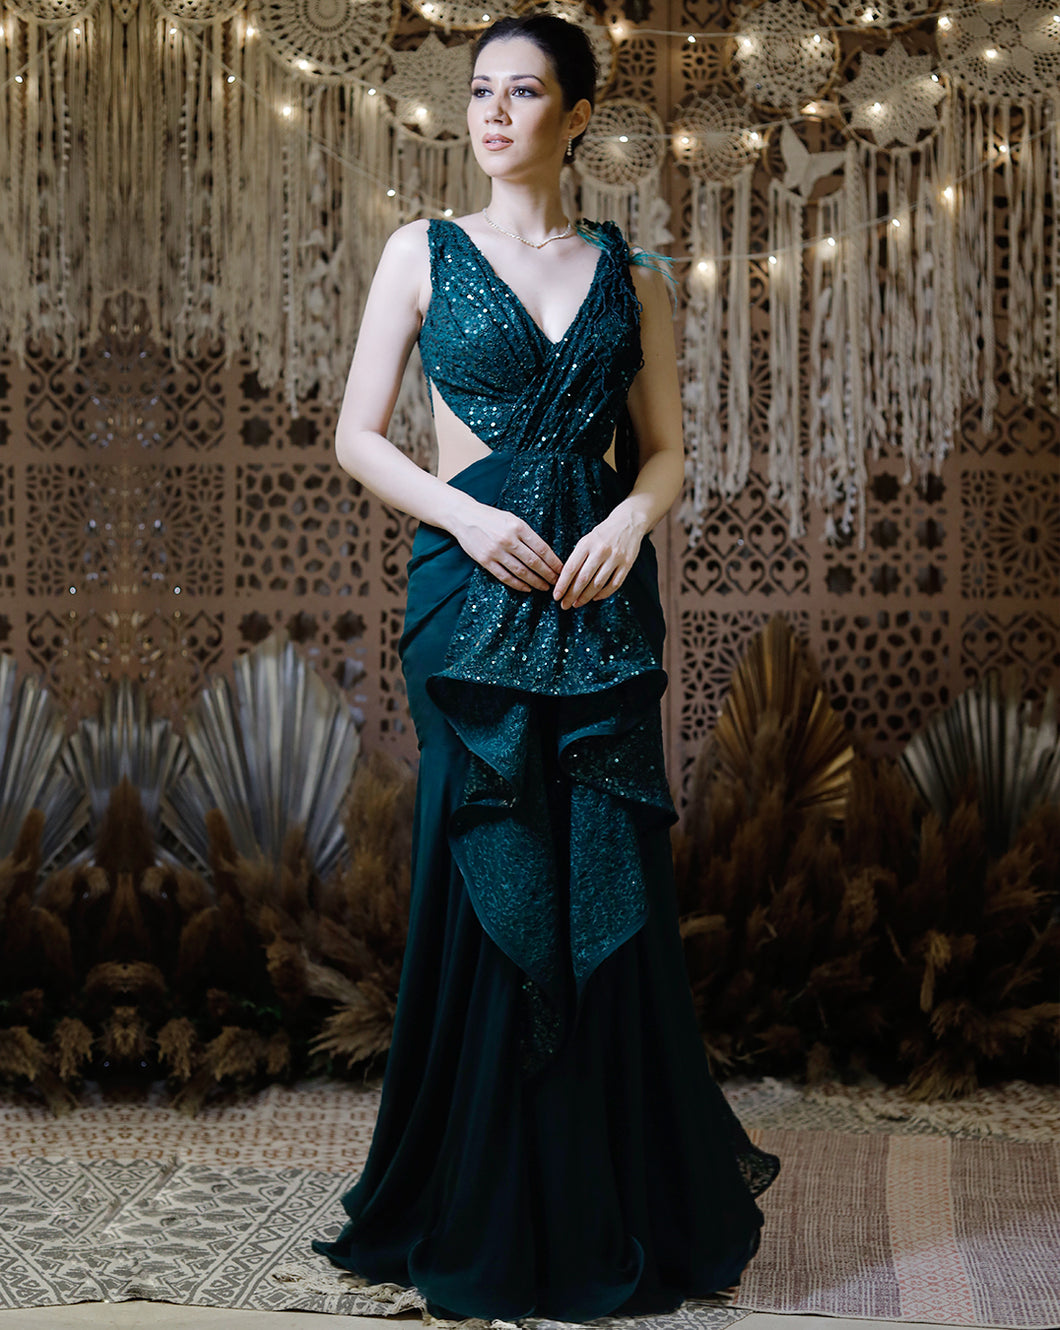 The Shimmering green gown sari